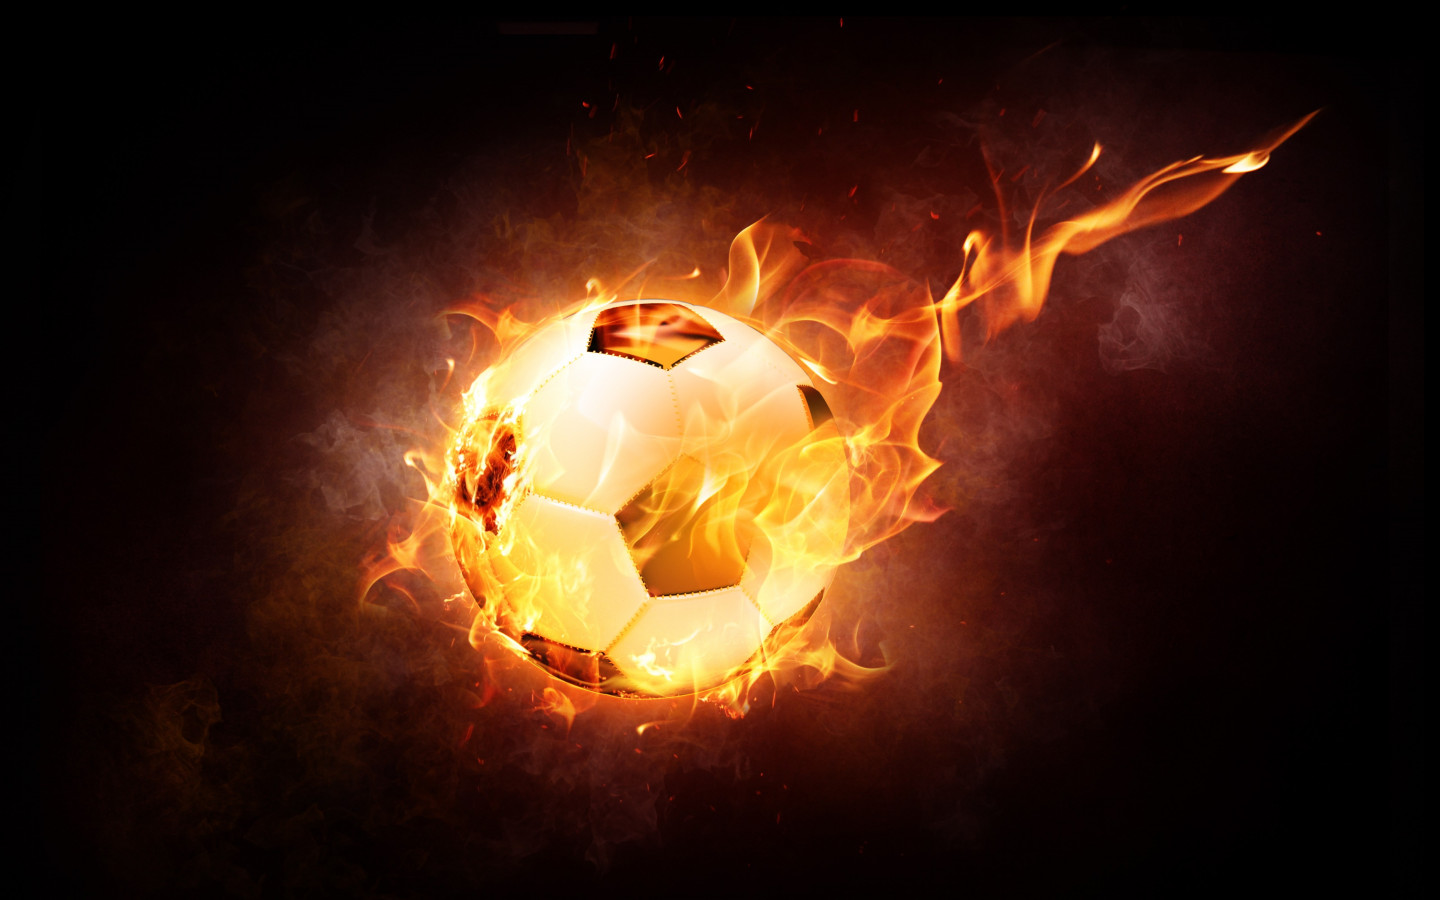 The football ball is on fire wallpaper 1440x900